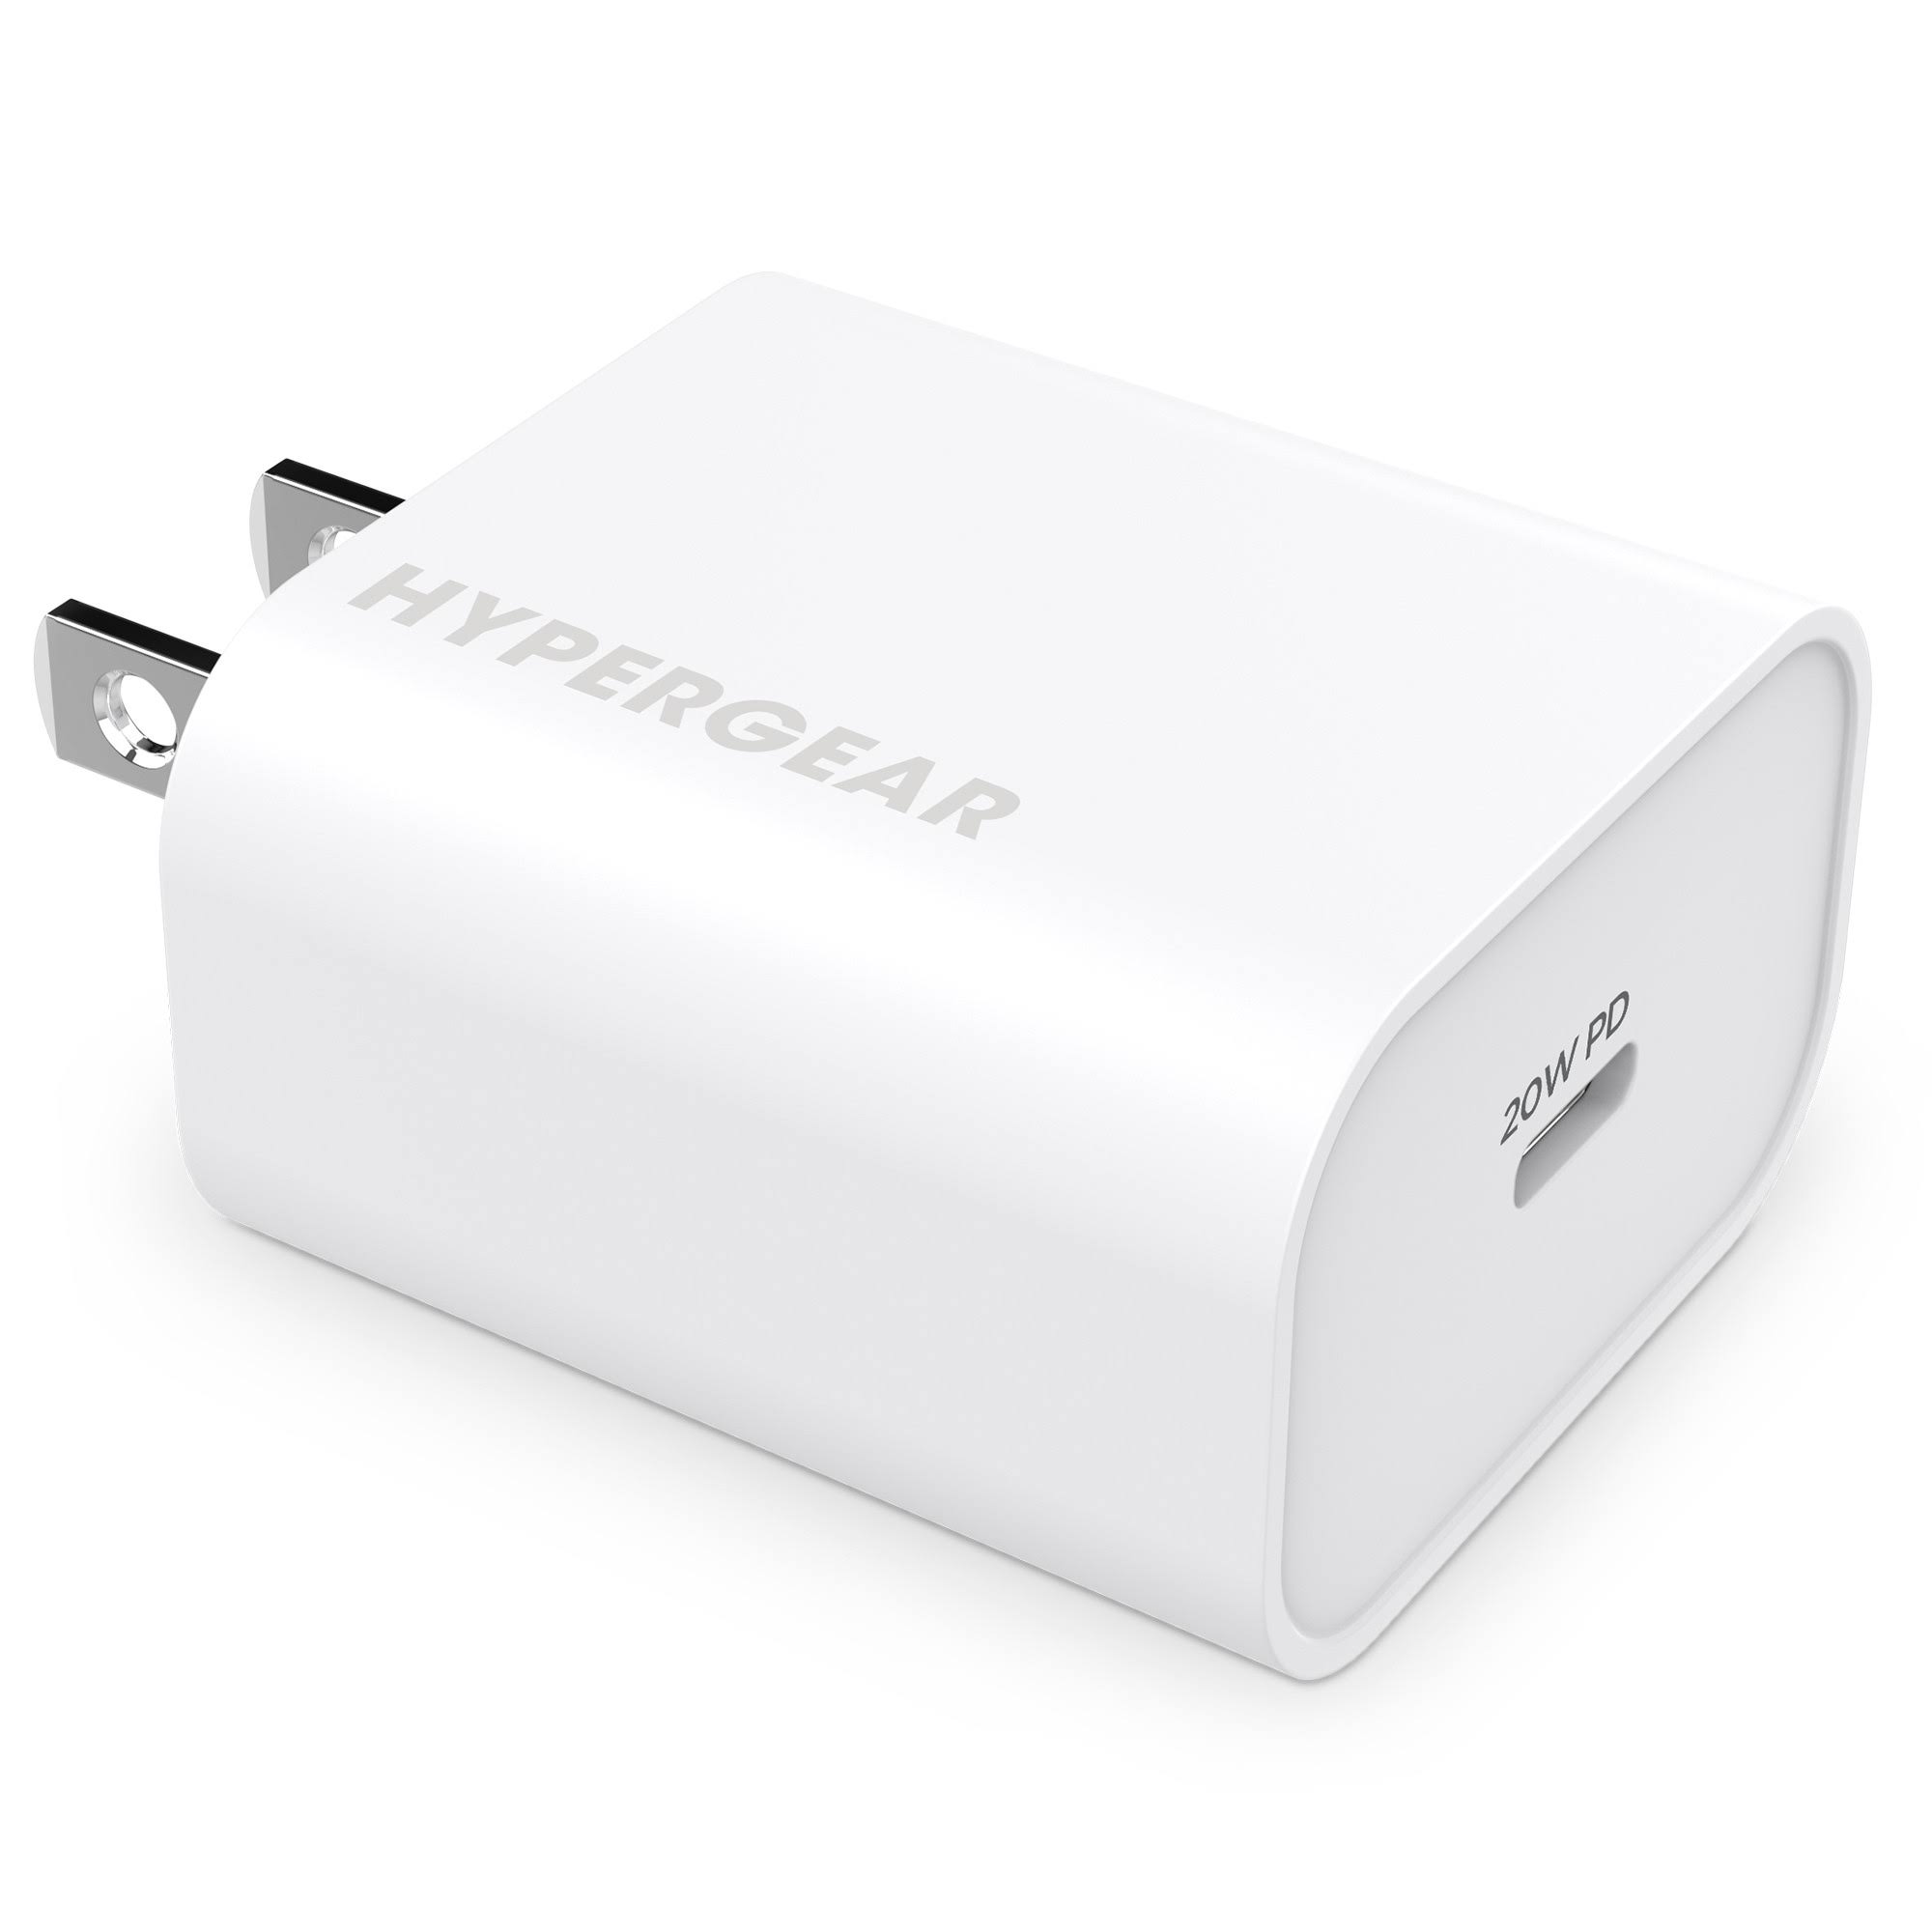 Hypergear 20W USB-C PD Wall Charger - WHITE.